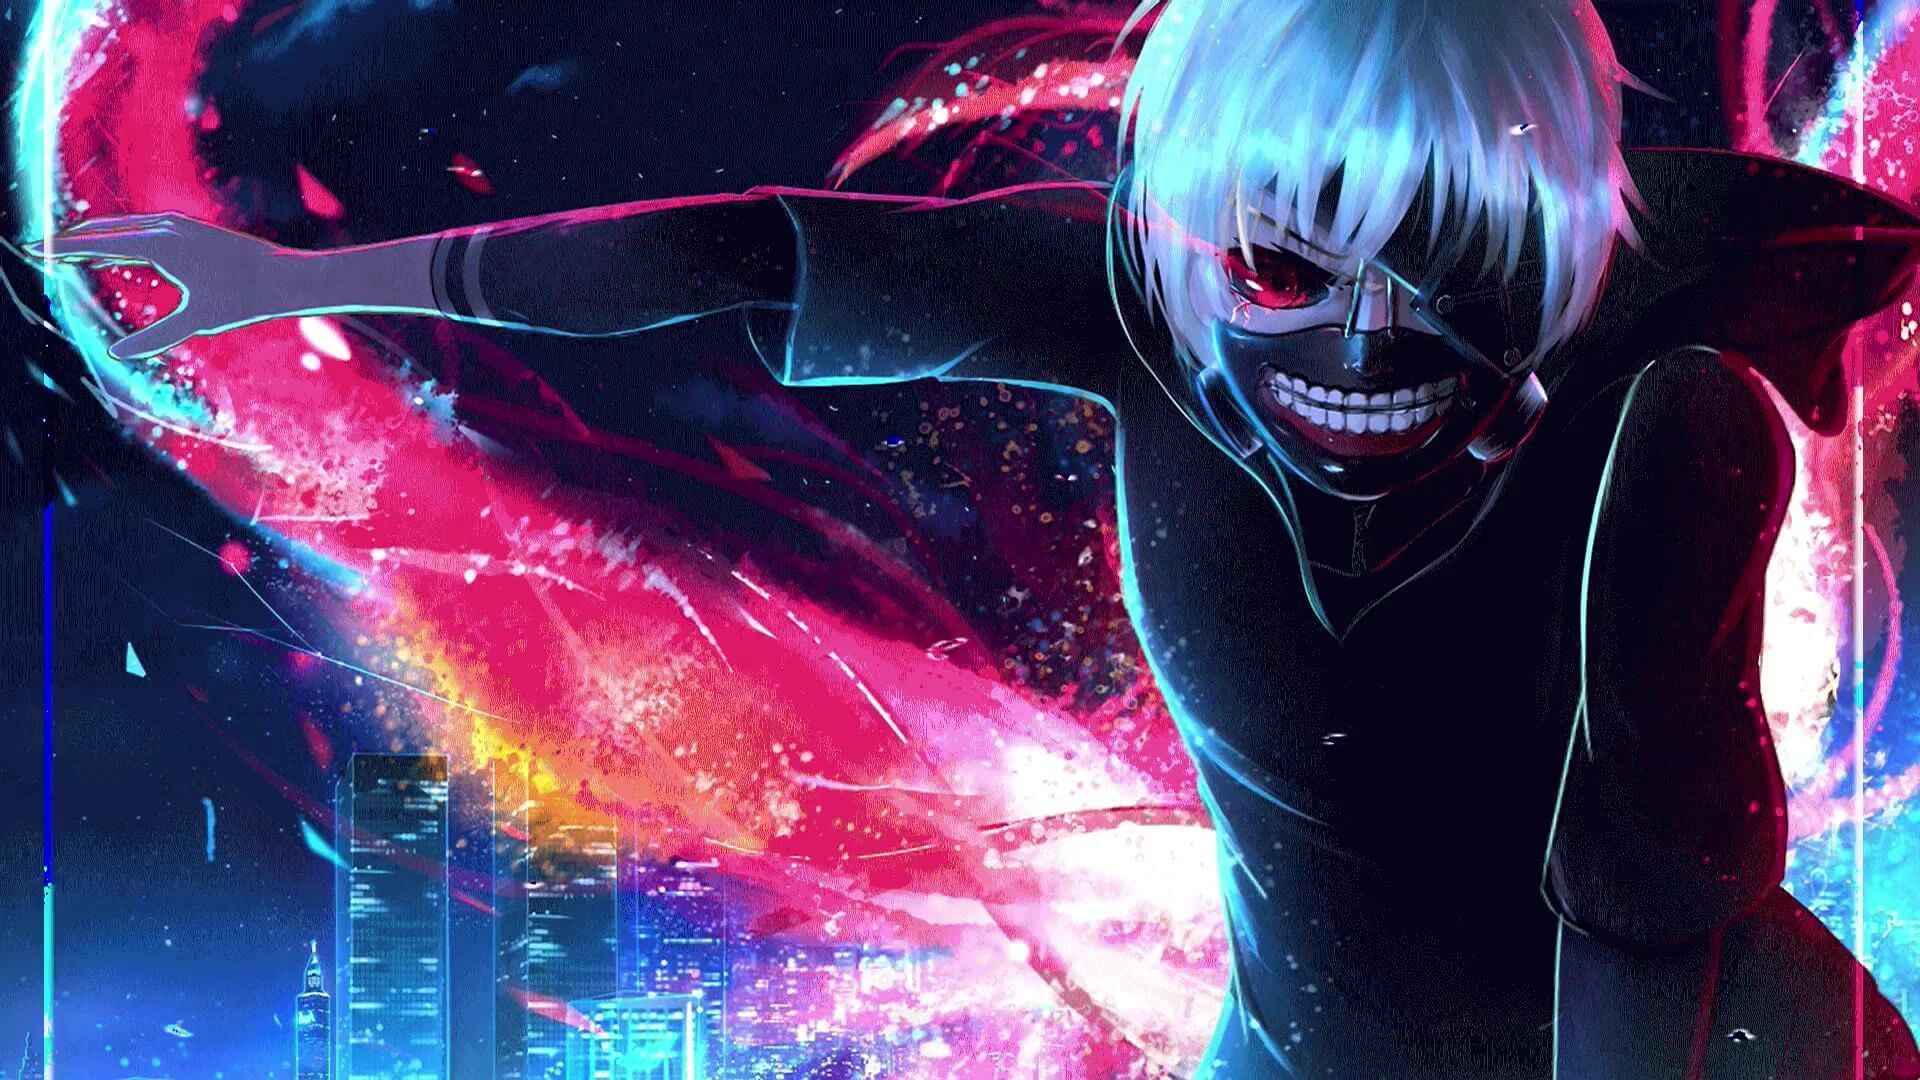 Tokyo Ghoul Anime Live Wallpaper. Tokyo ghoul wallpaper, Tokyo ghoul anime, Tokyo ghoul